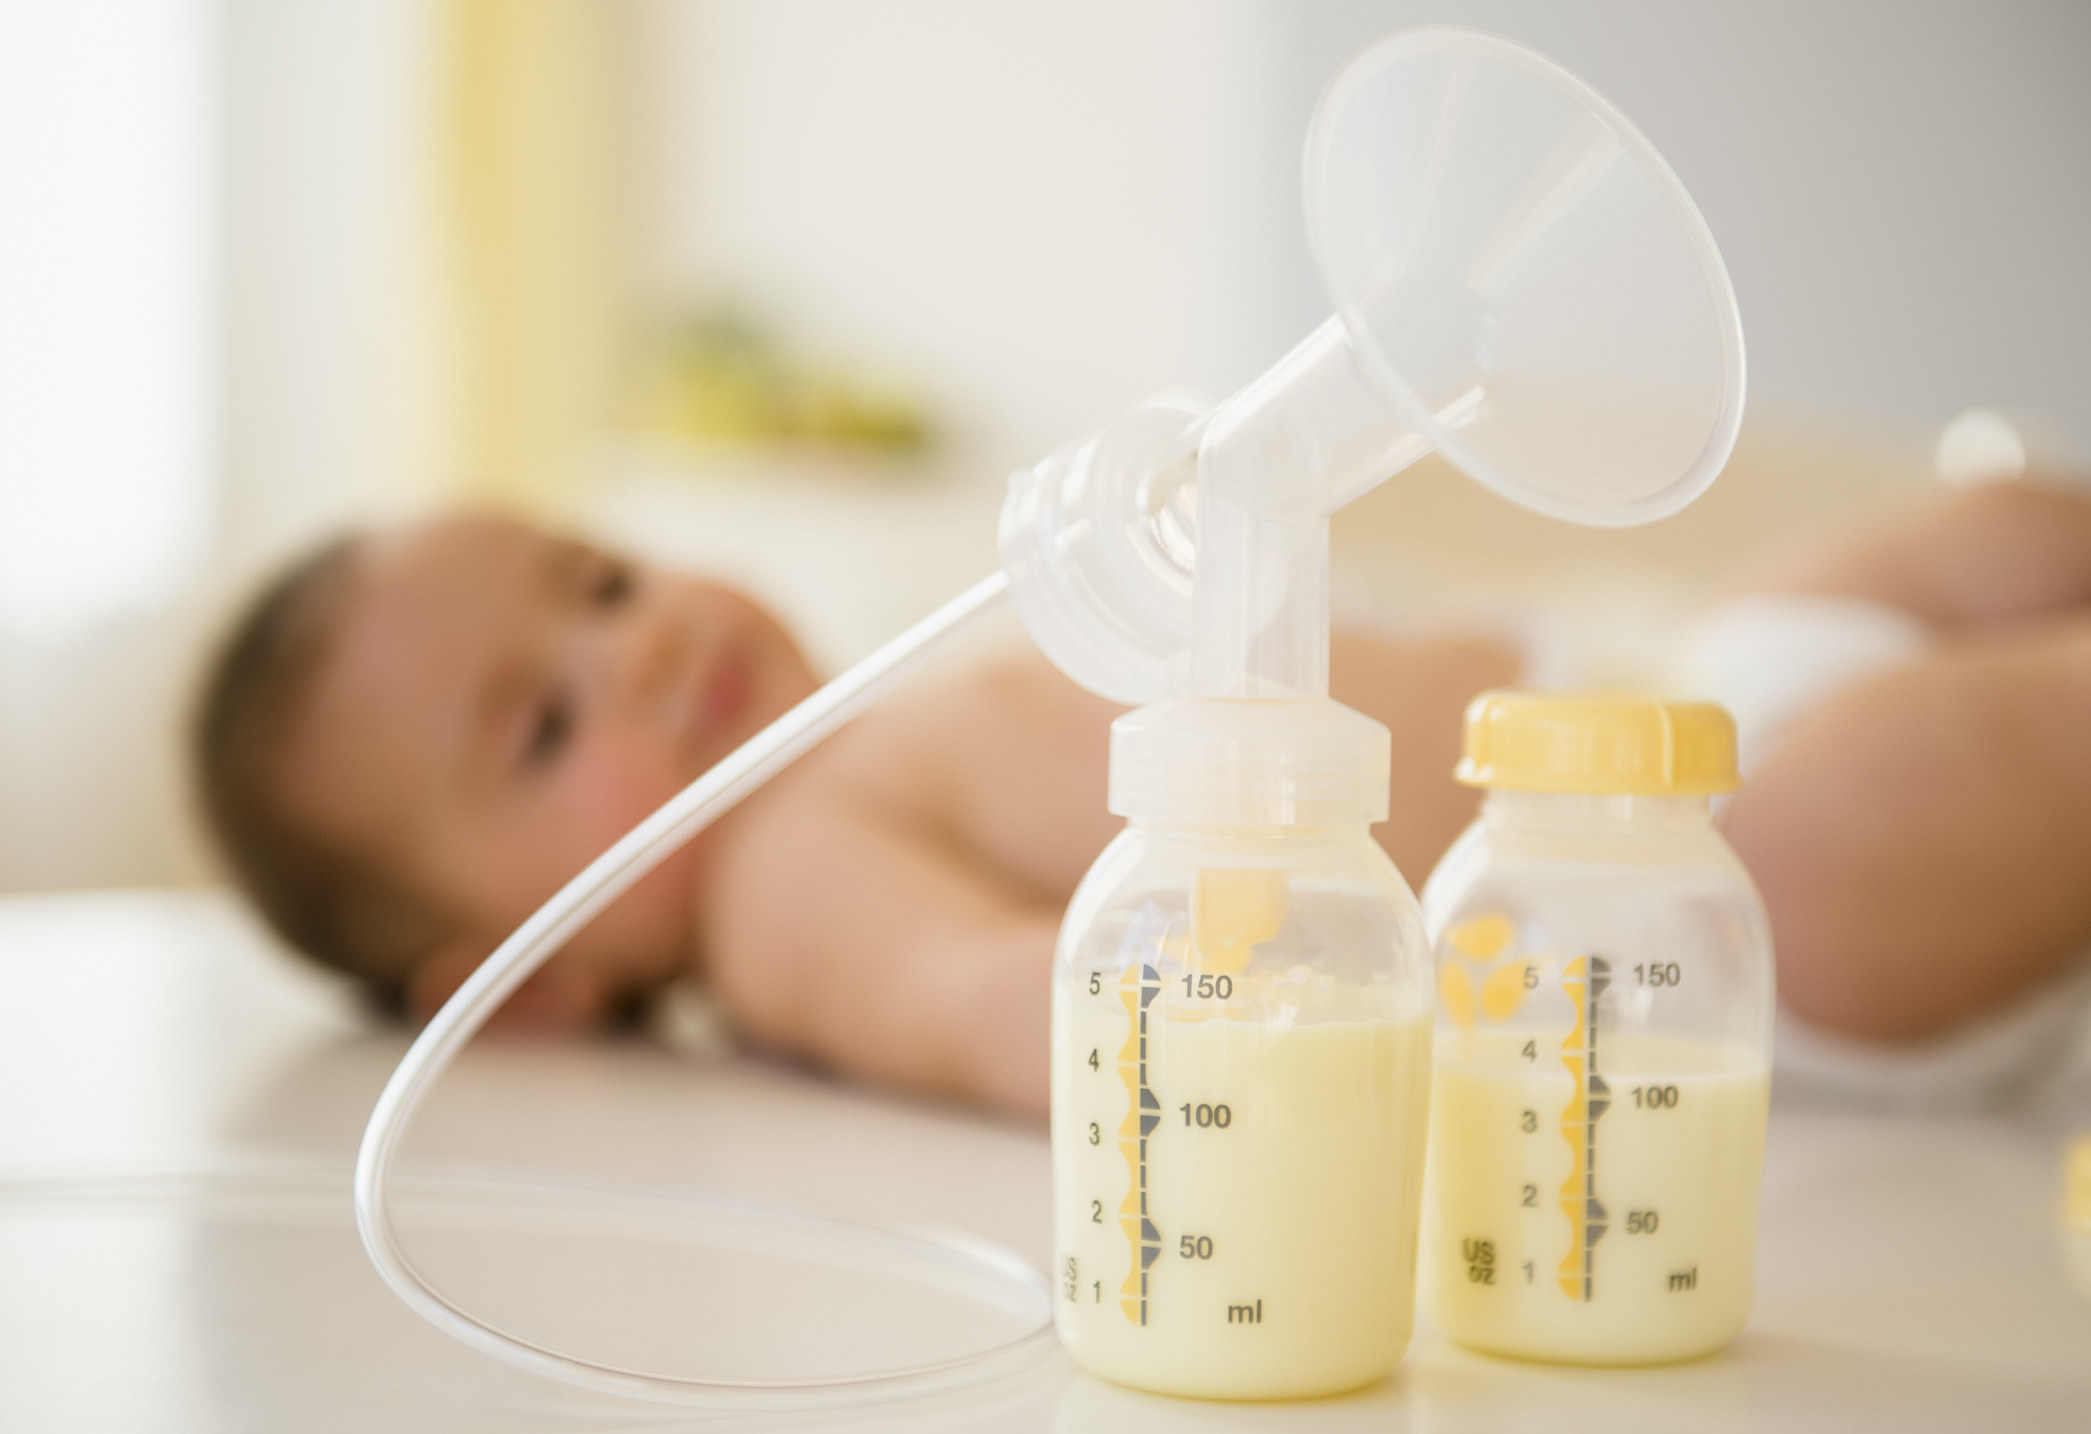 milk pumping materials next to a baby